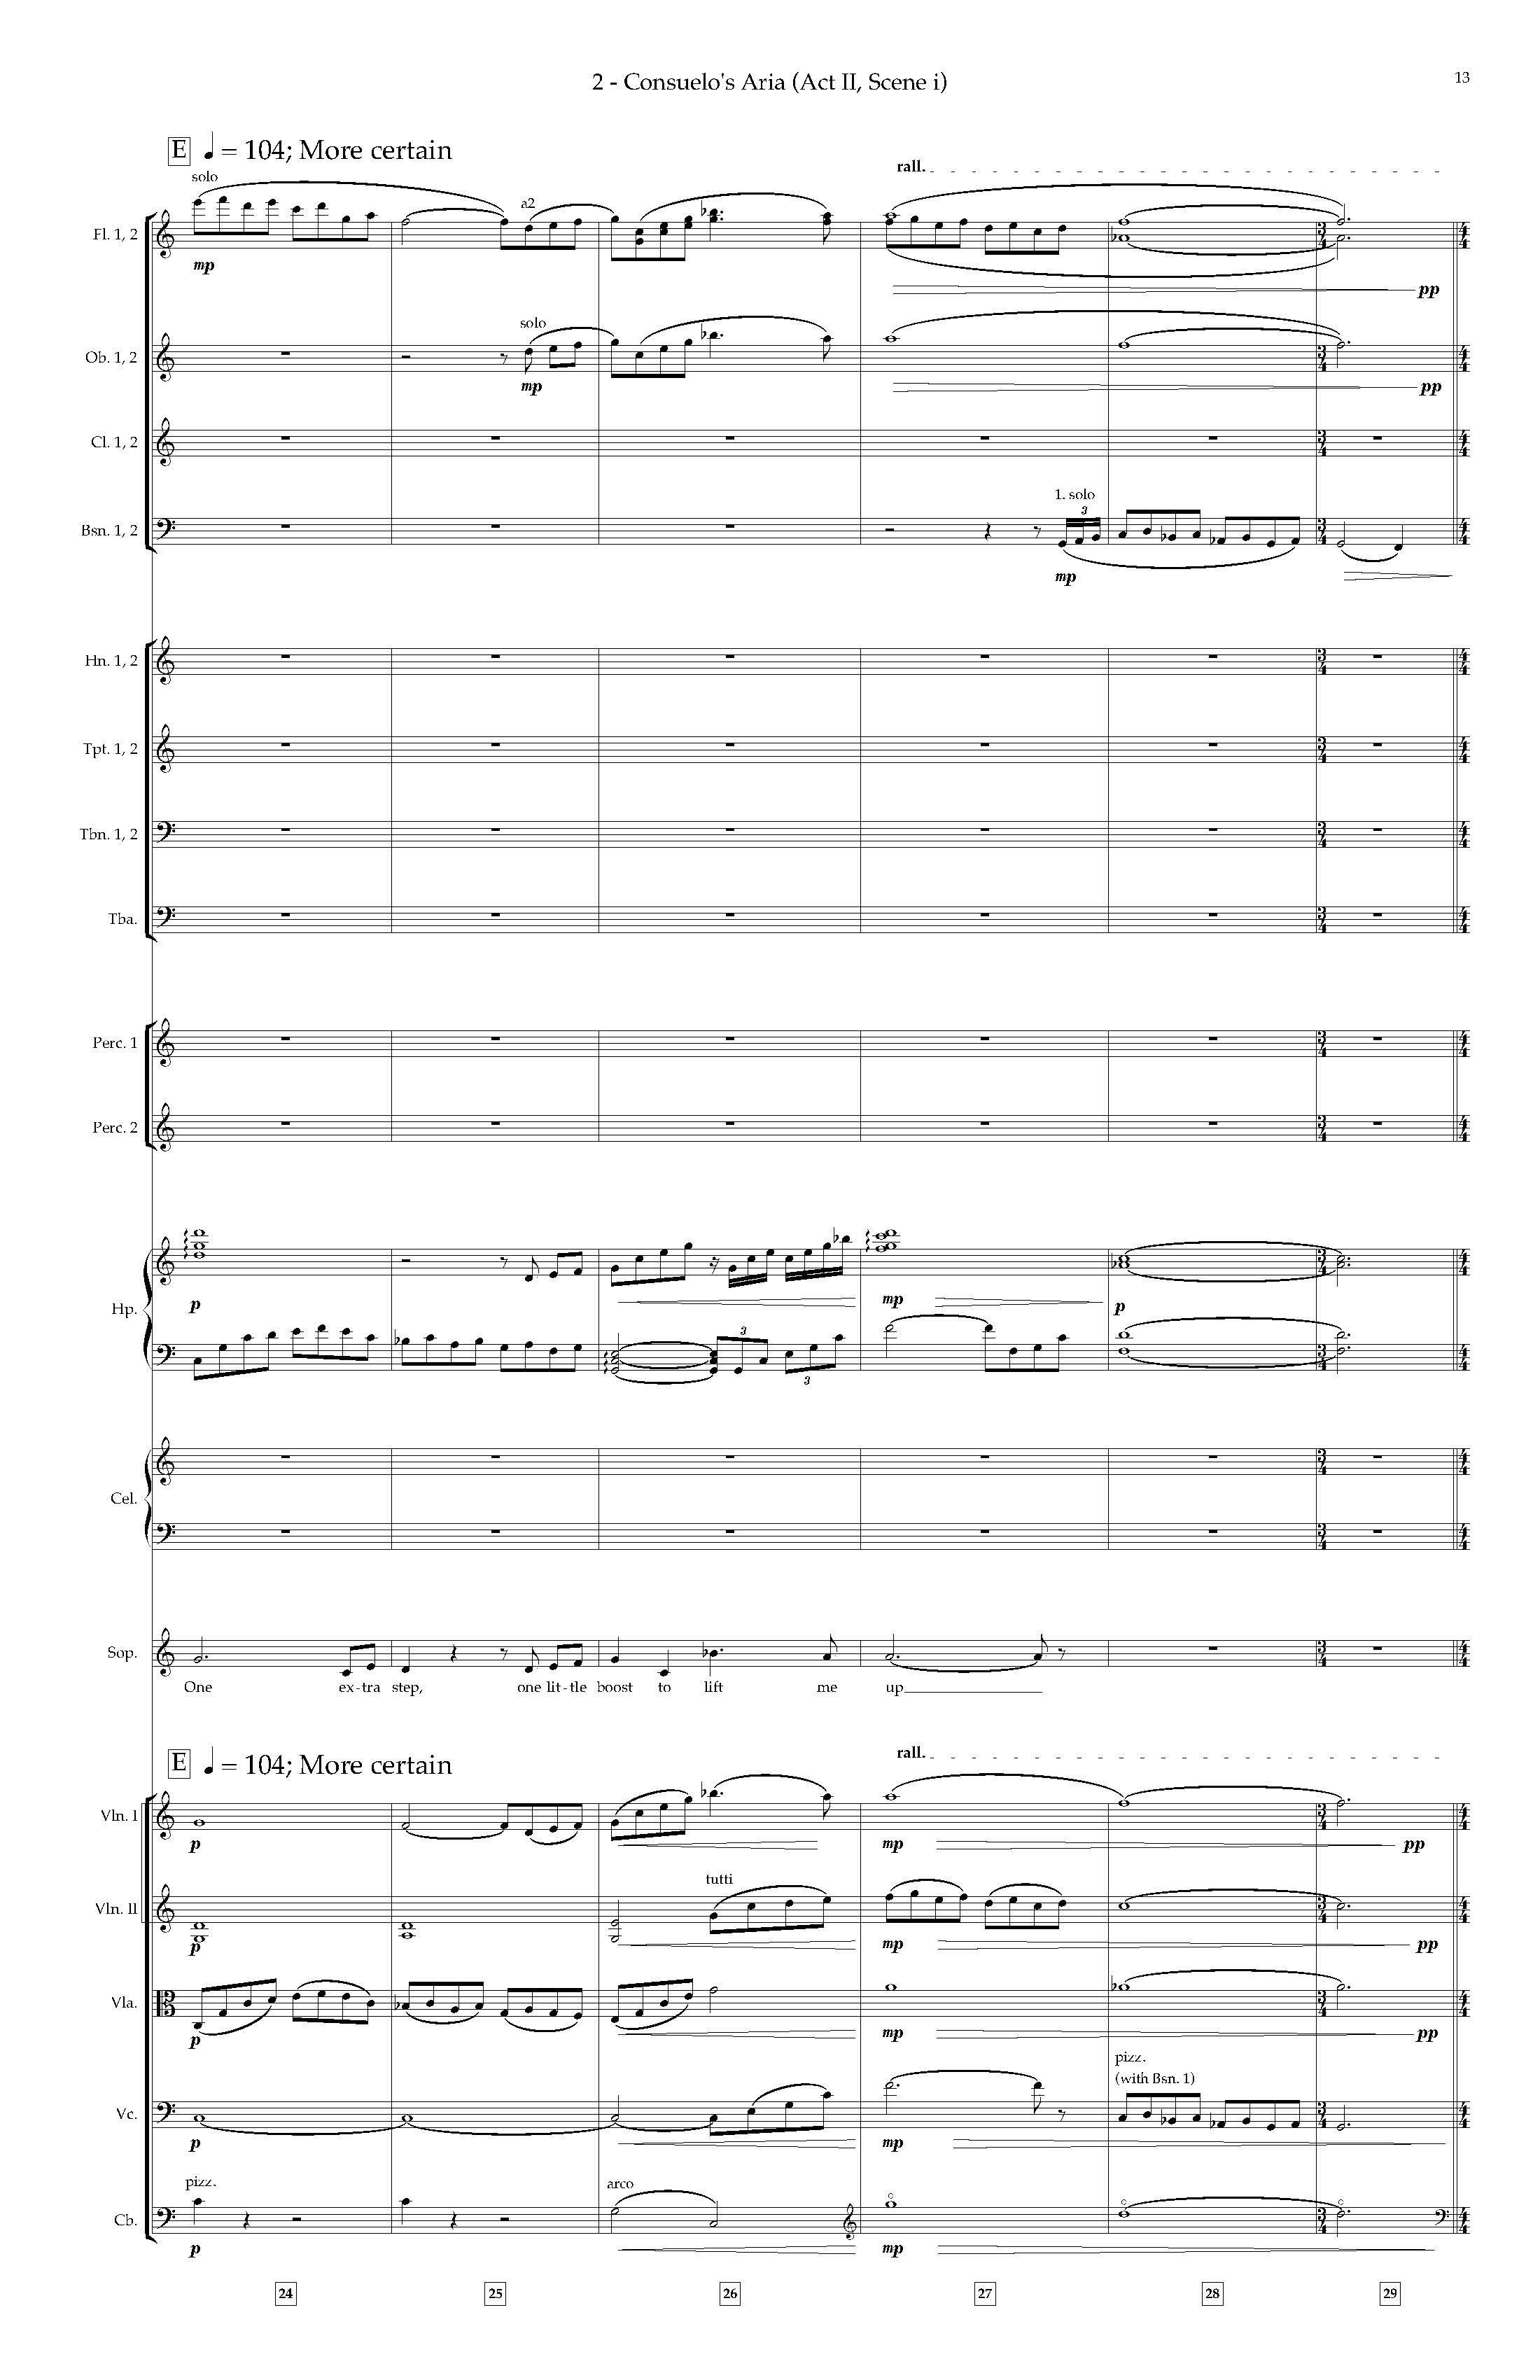 Arias and Interludes from HWGS - Complete Score_Page_19.jpg